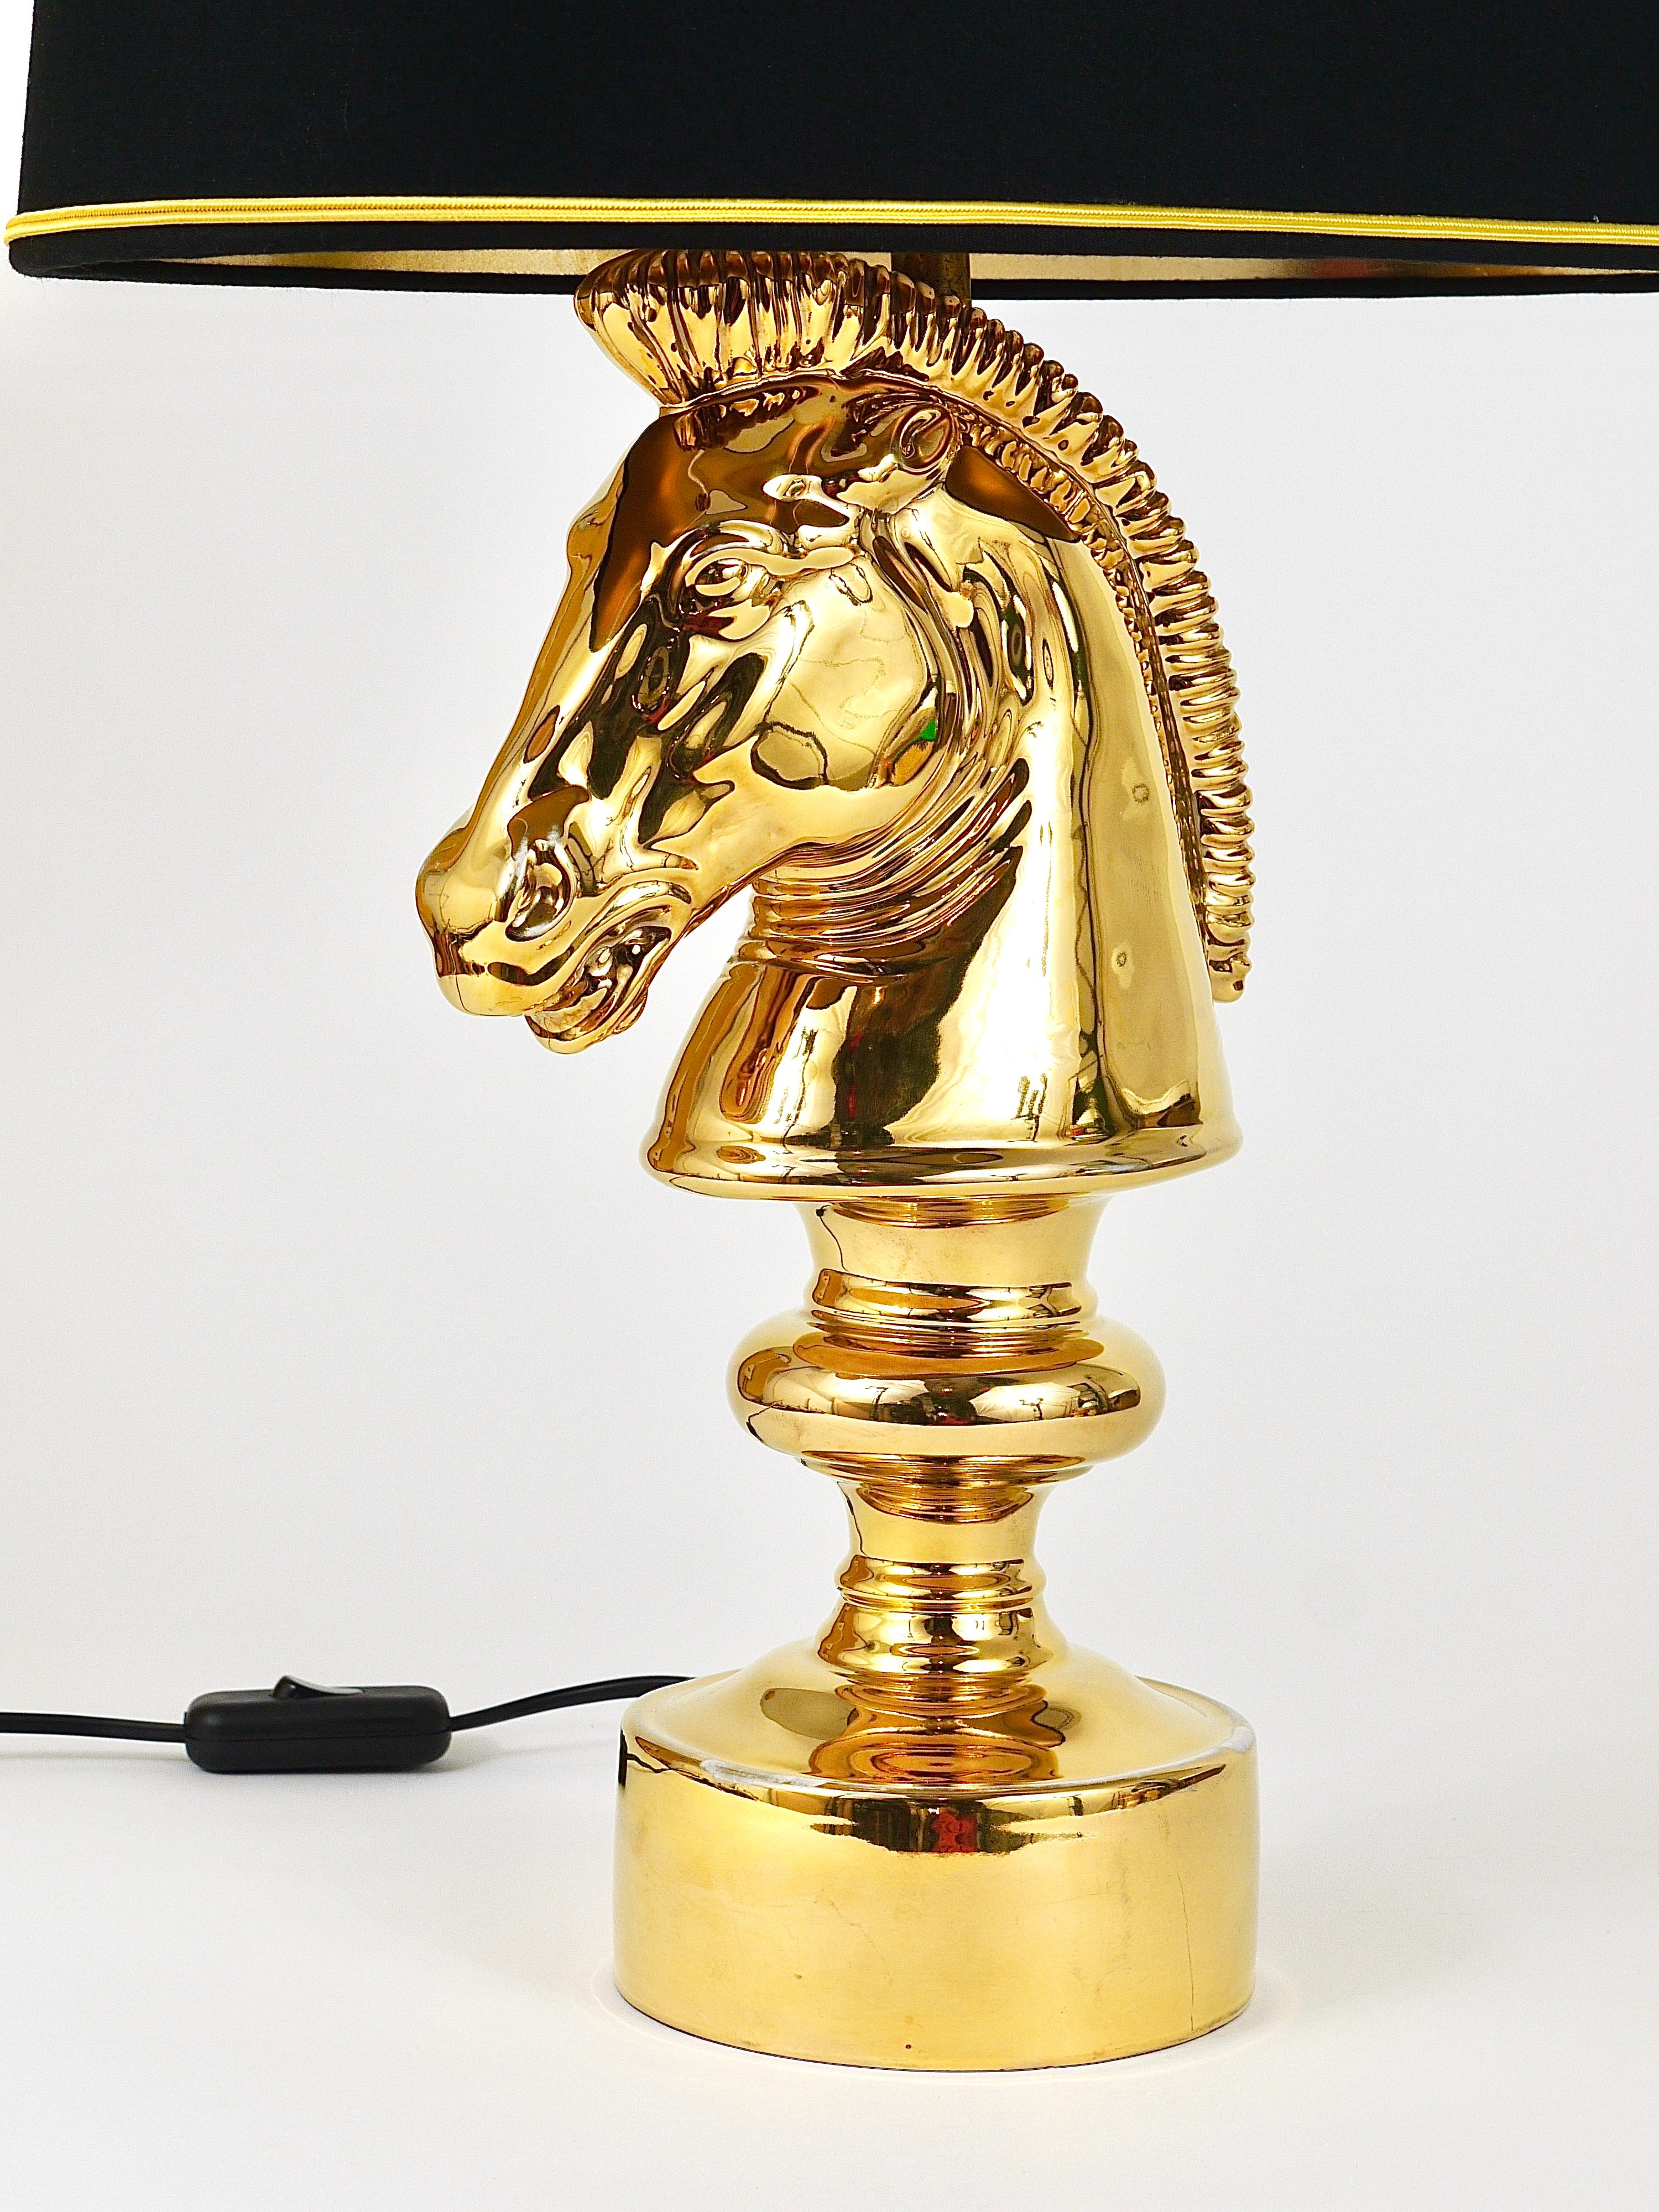 Golden Hollywood Regency Horse Sculpture Table or Side Lamp, Italy, 1970s For Sale 11